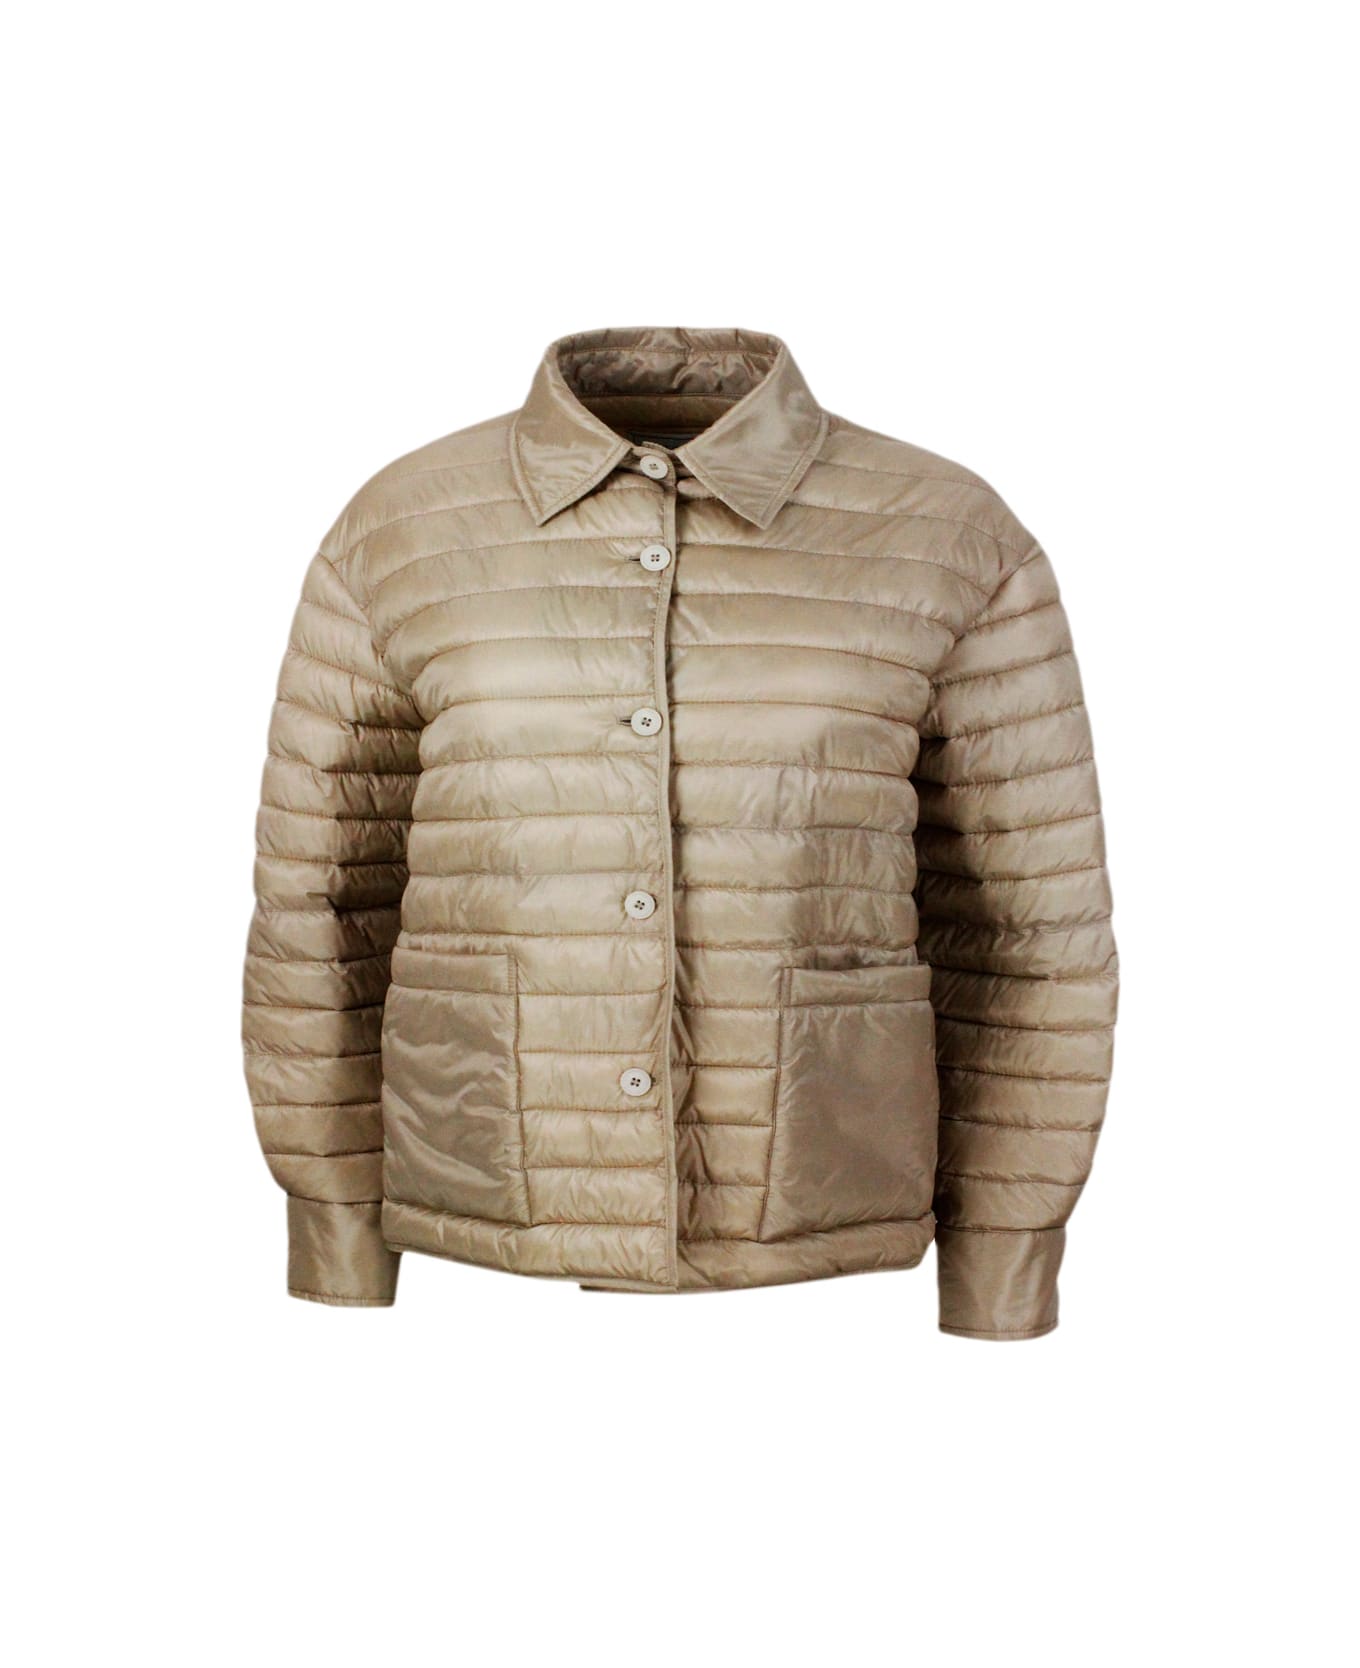 Antonelli Lightweight 100g Padded Jacket With Shirt Collar, Button Closure And Patch Pockets - Beige ダウンジャケット